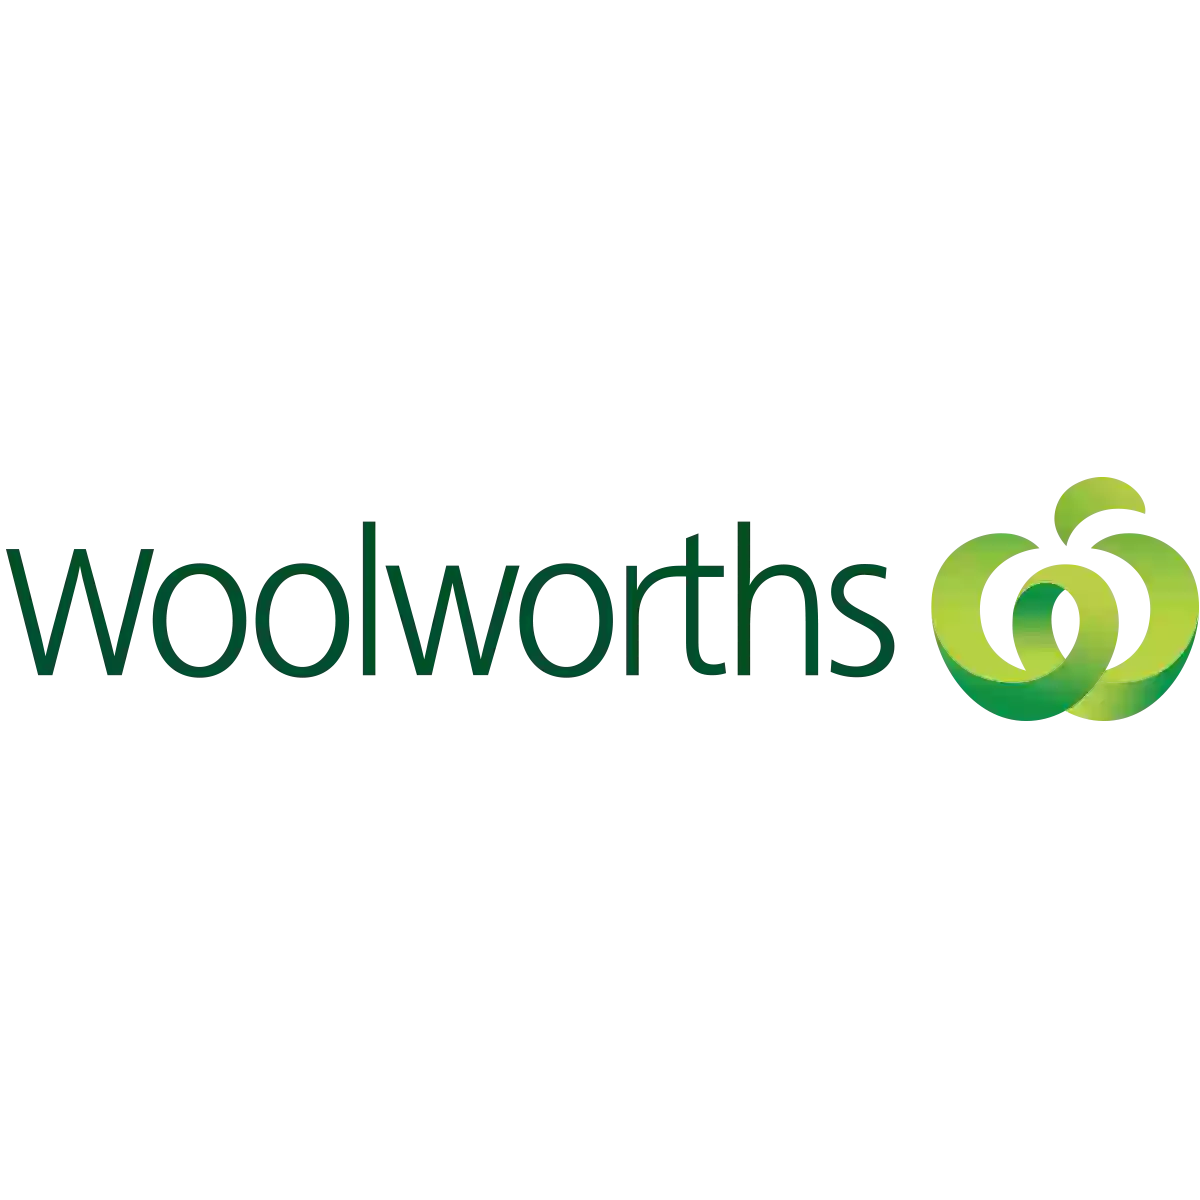 Woolworths Rundle Mall